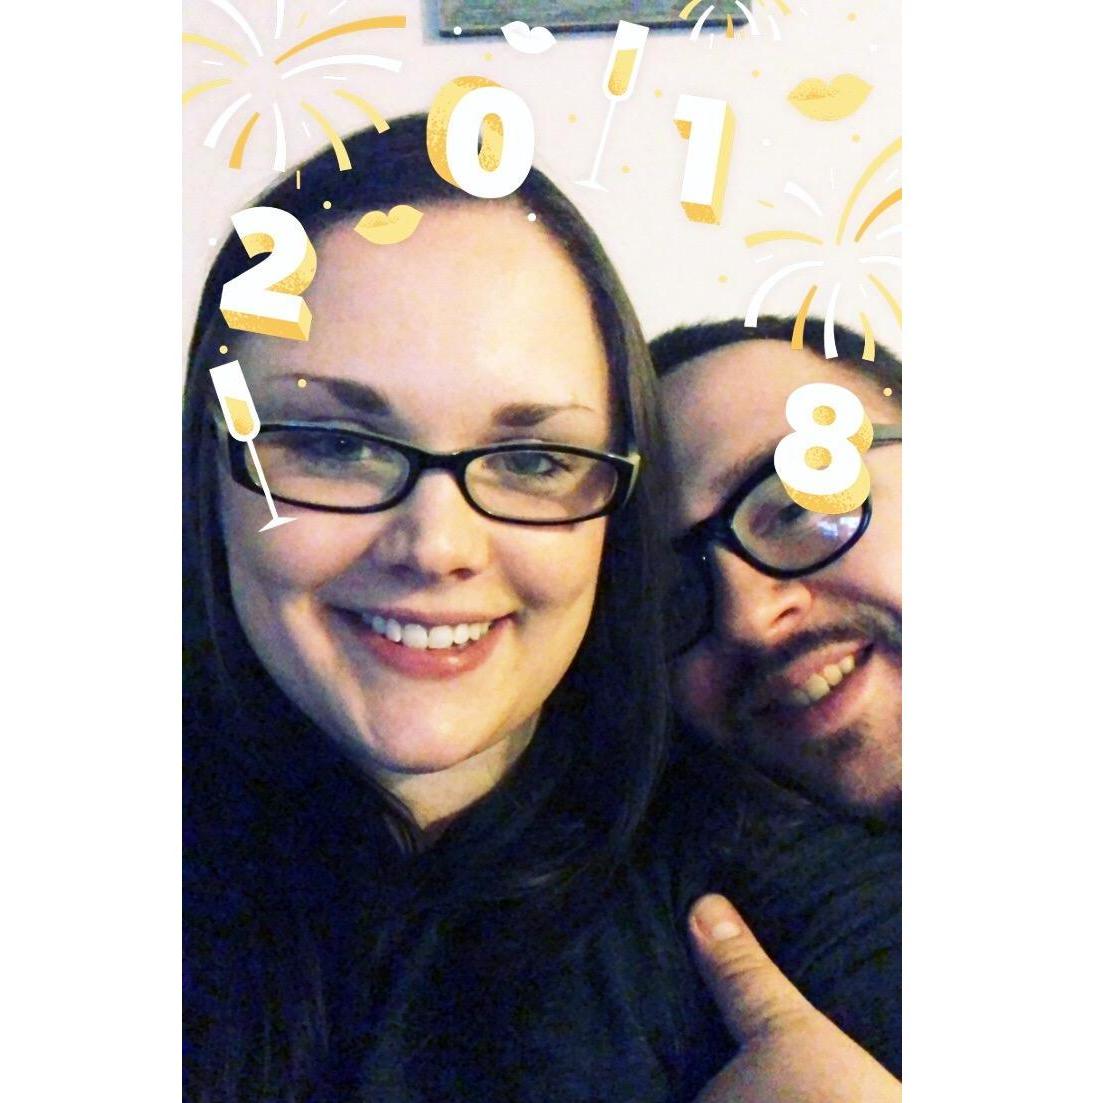 New Years 2018. Our 4th time celebrating together. 🥂